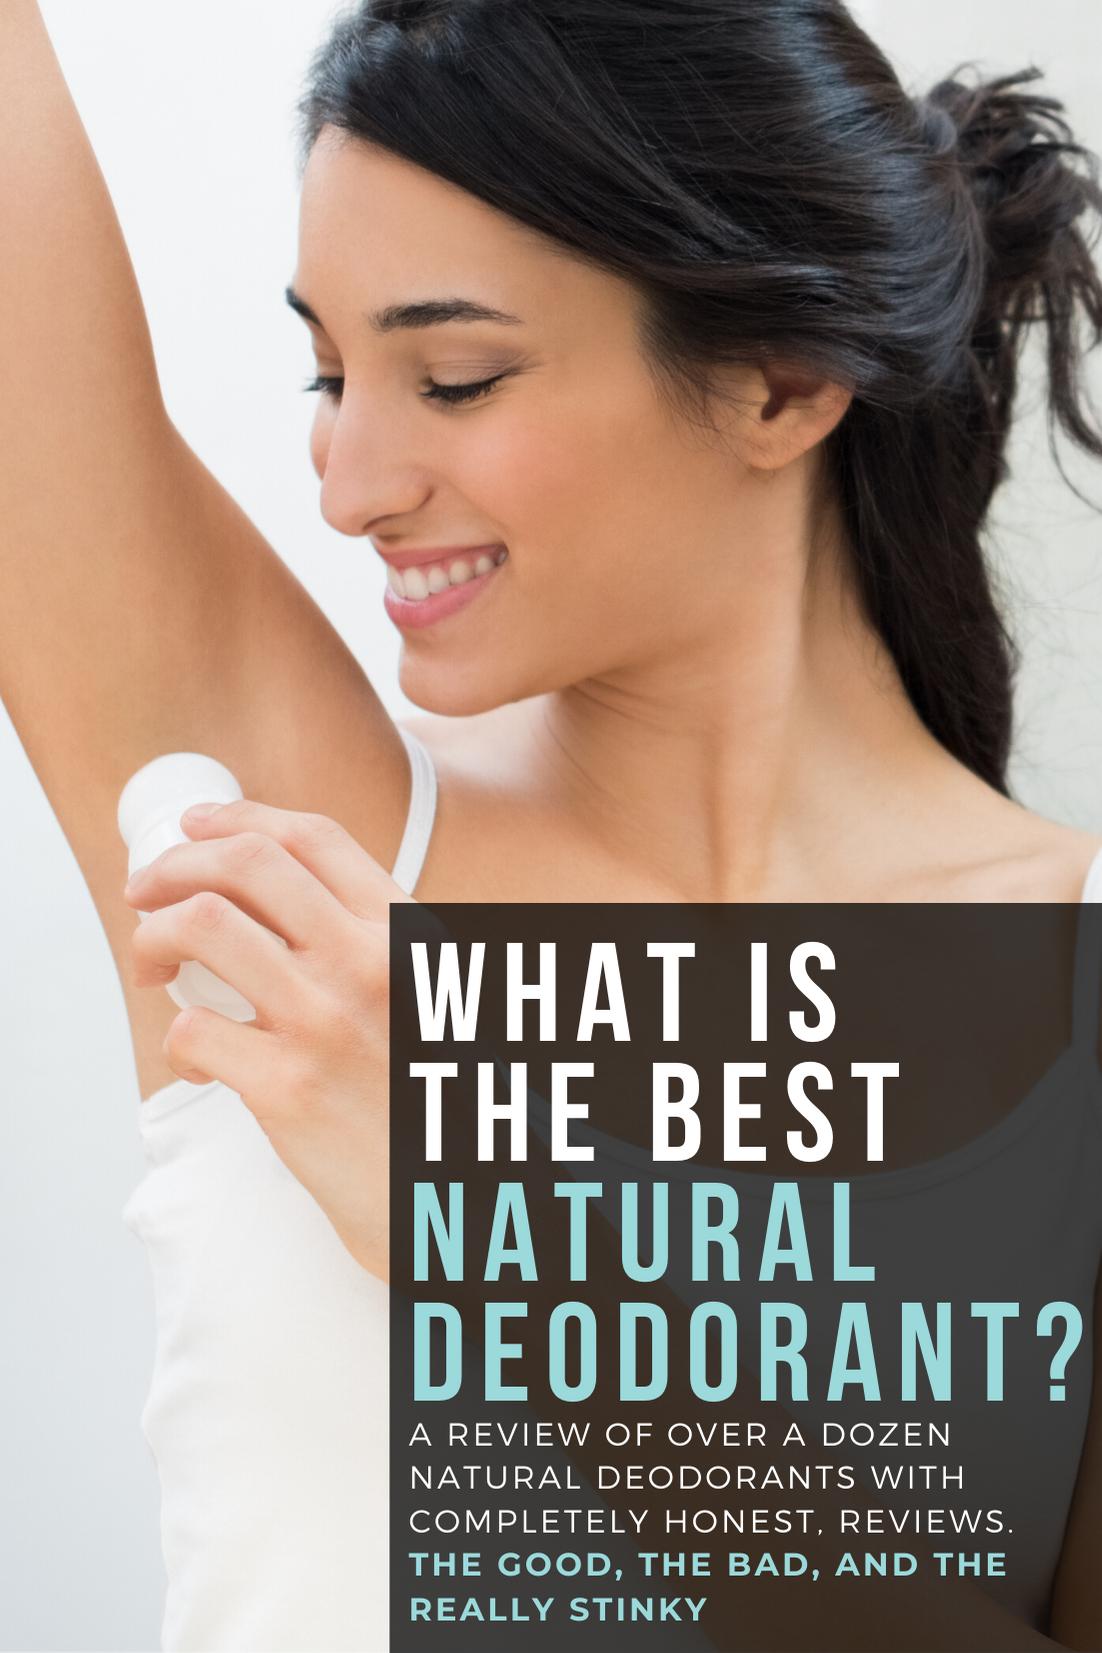 https://www.wardrobeoxygen.com/wp-content/uploads/2019/11/best-natural-deodorant-review-for-lume.png